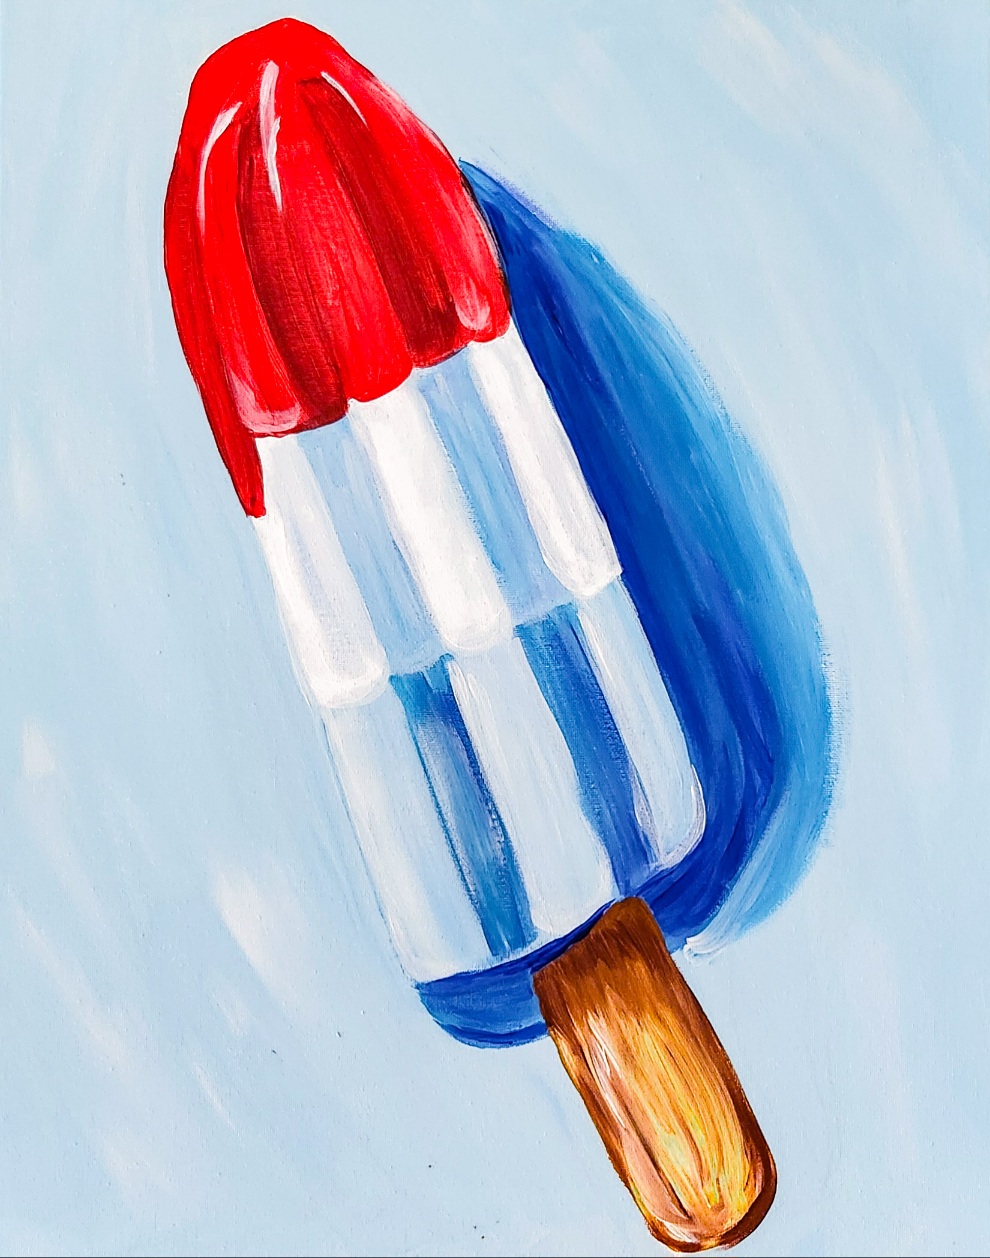 Patriotic Popsicle on 12x16 canvas at 12:00 pm